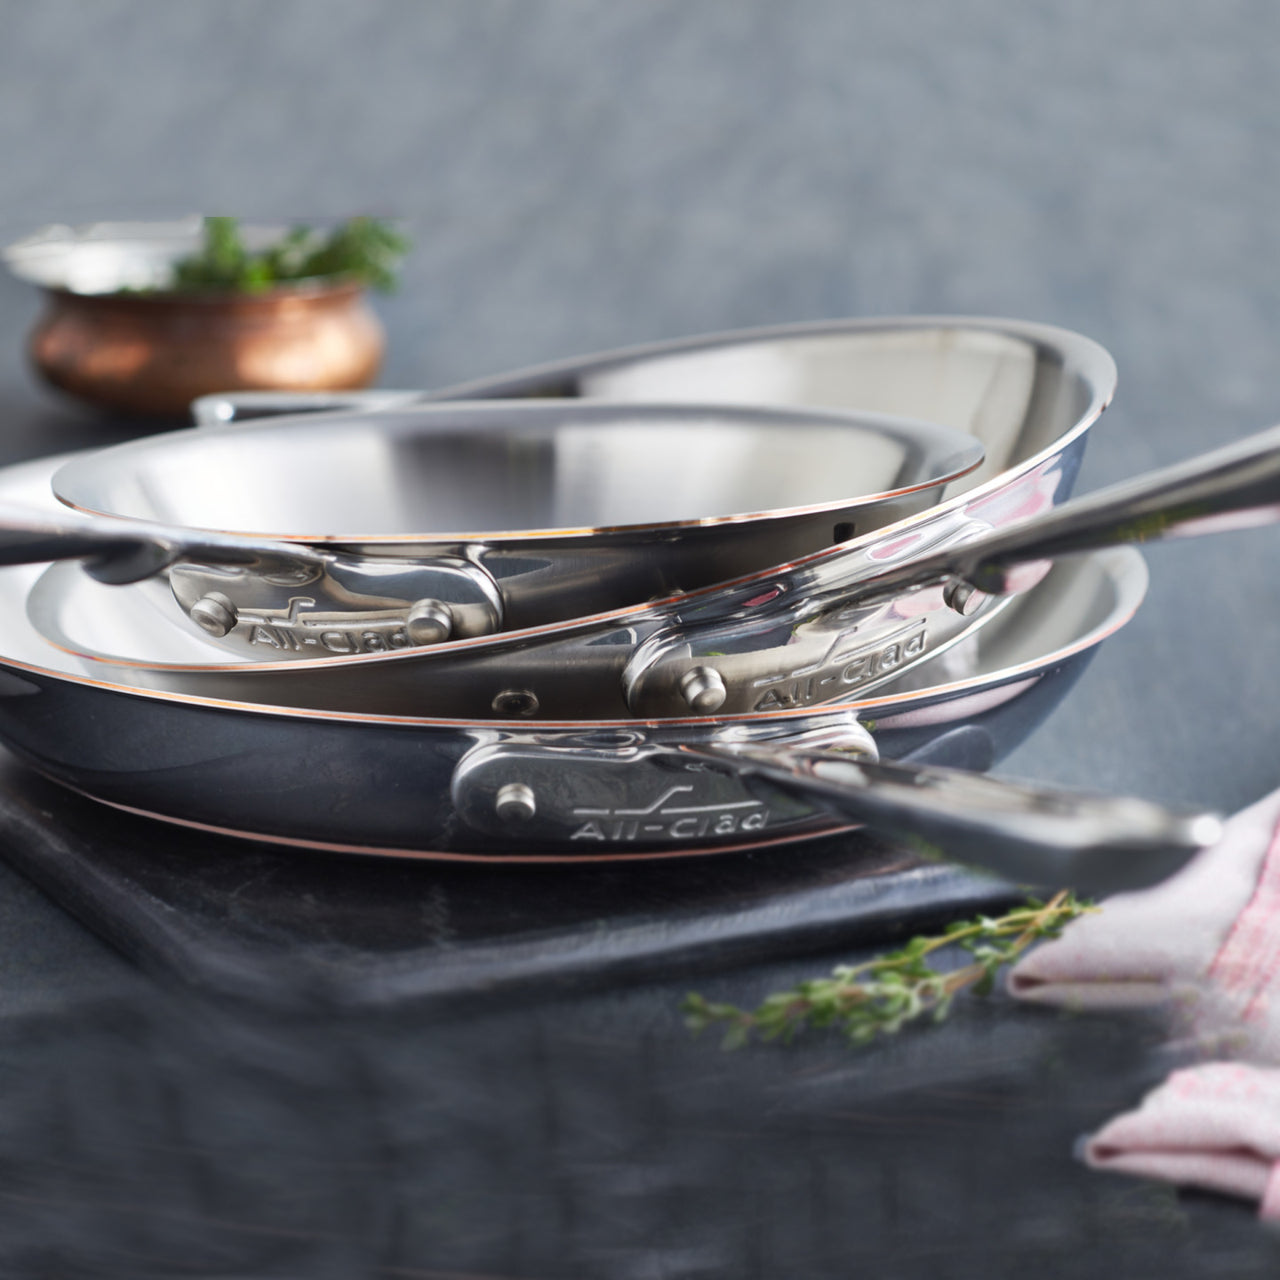 All-Clad Copper Core Non-Stick Frying Pan